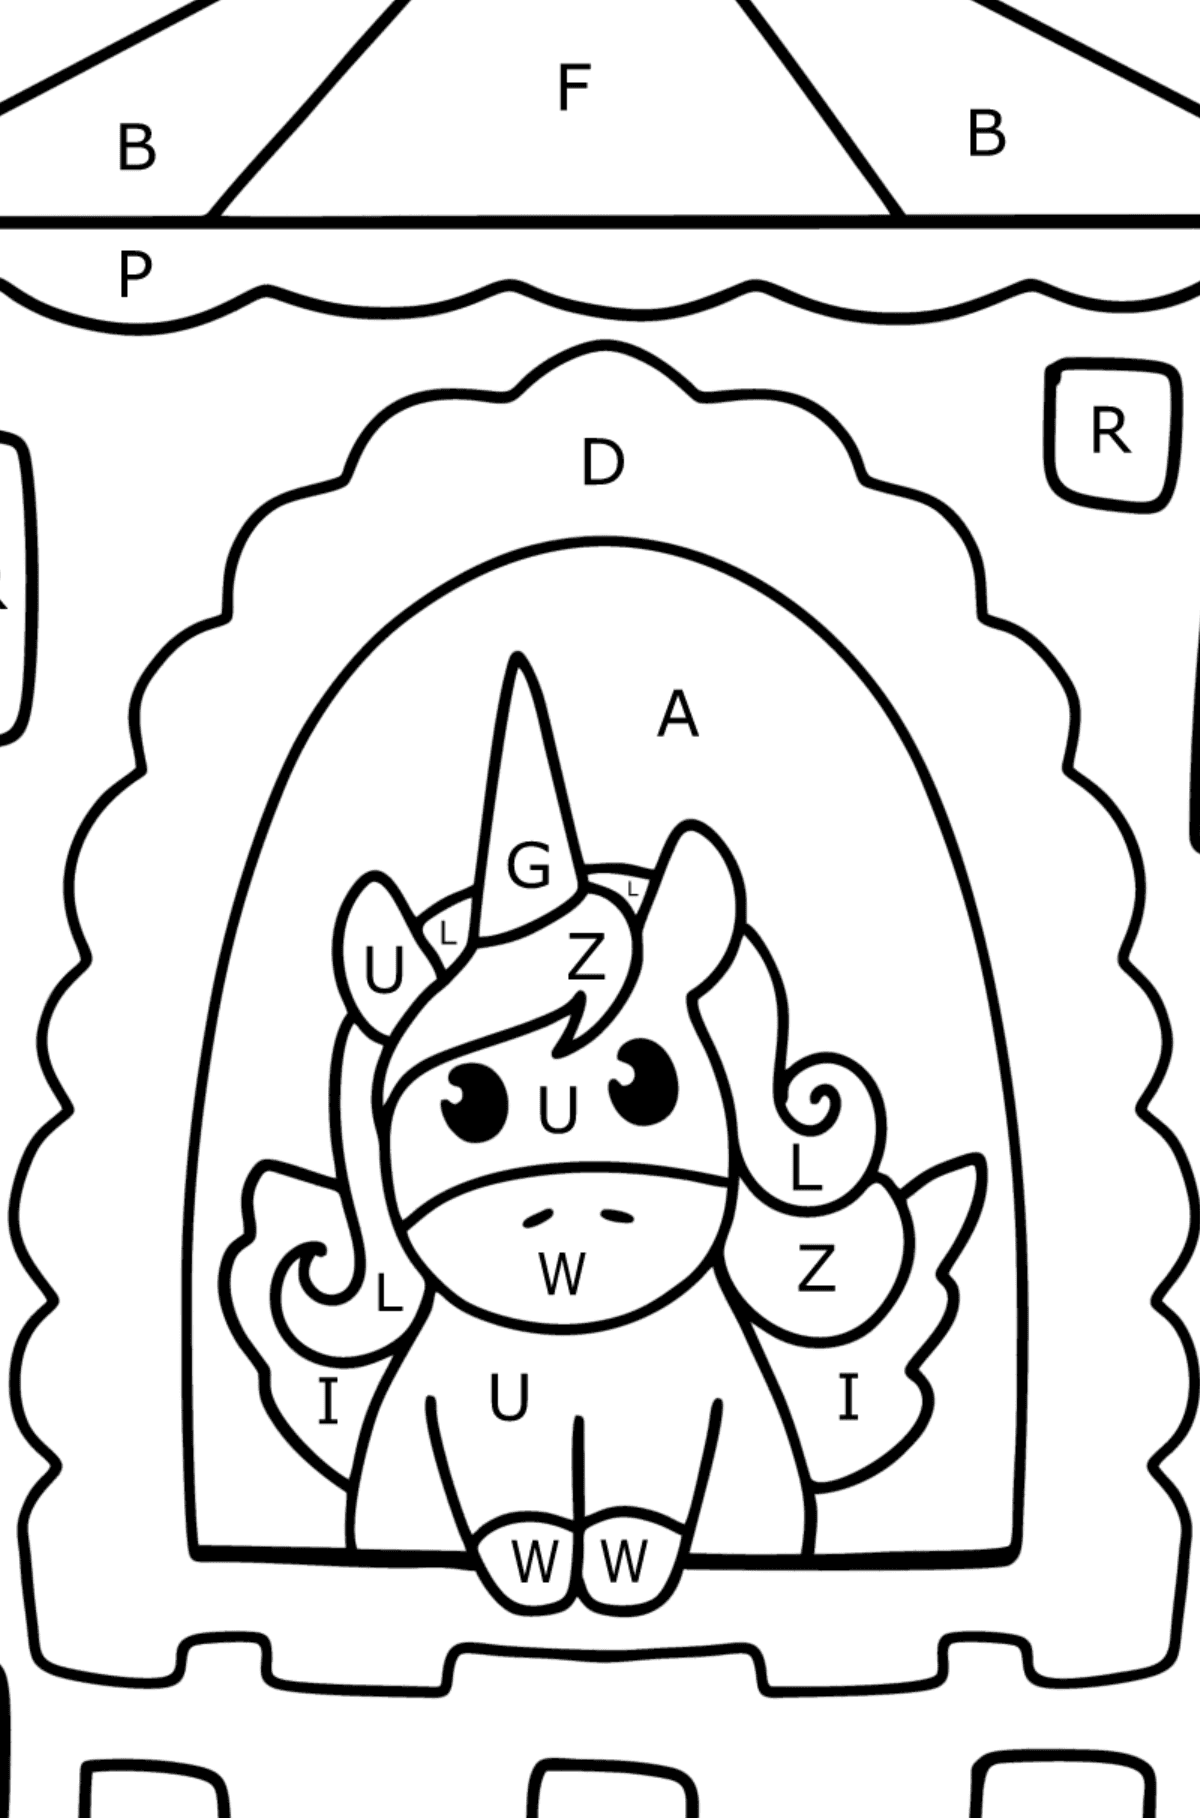 Unicorn in fairyland coloring page - Coloring by Letters for Kids